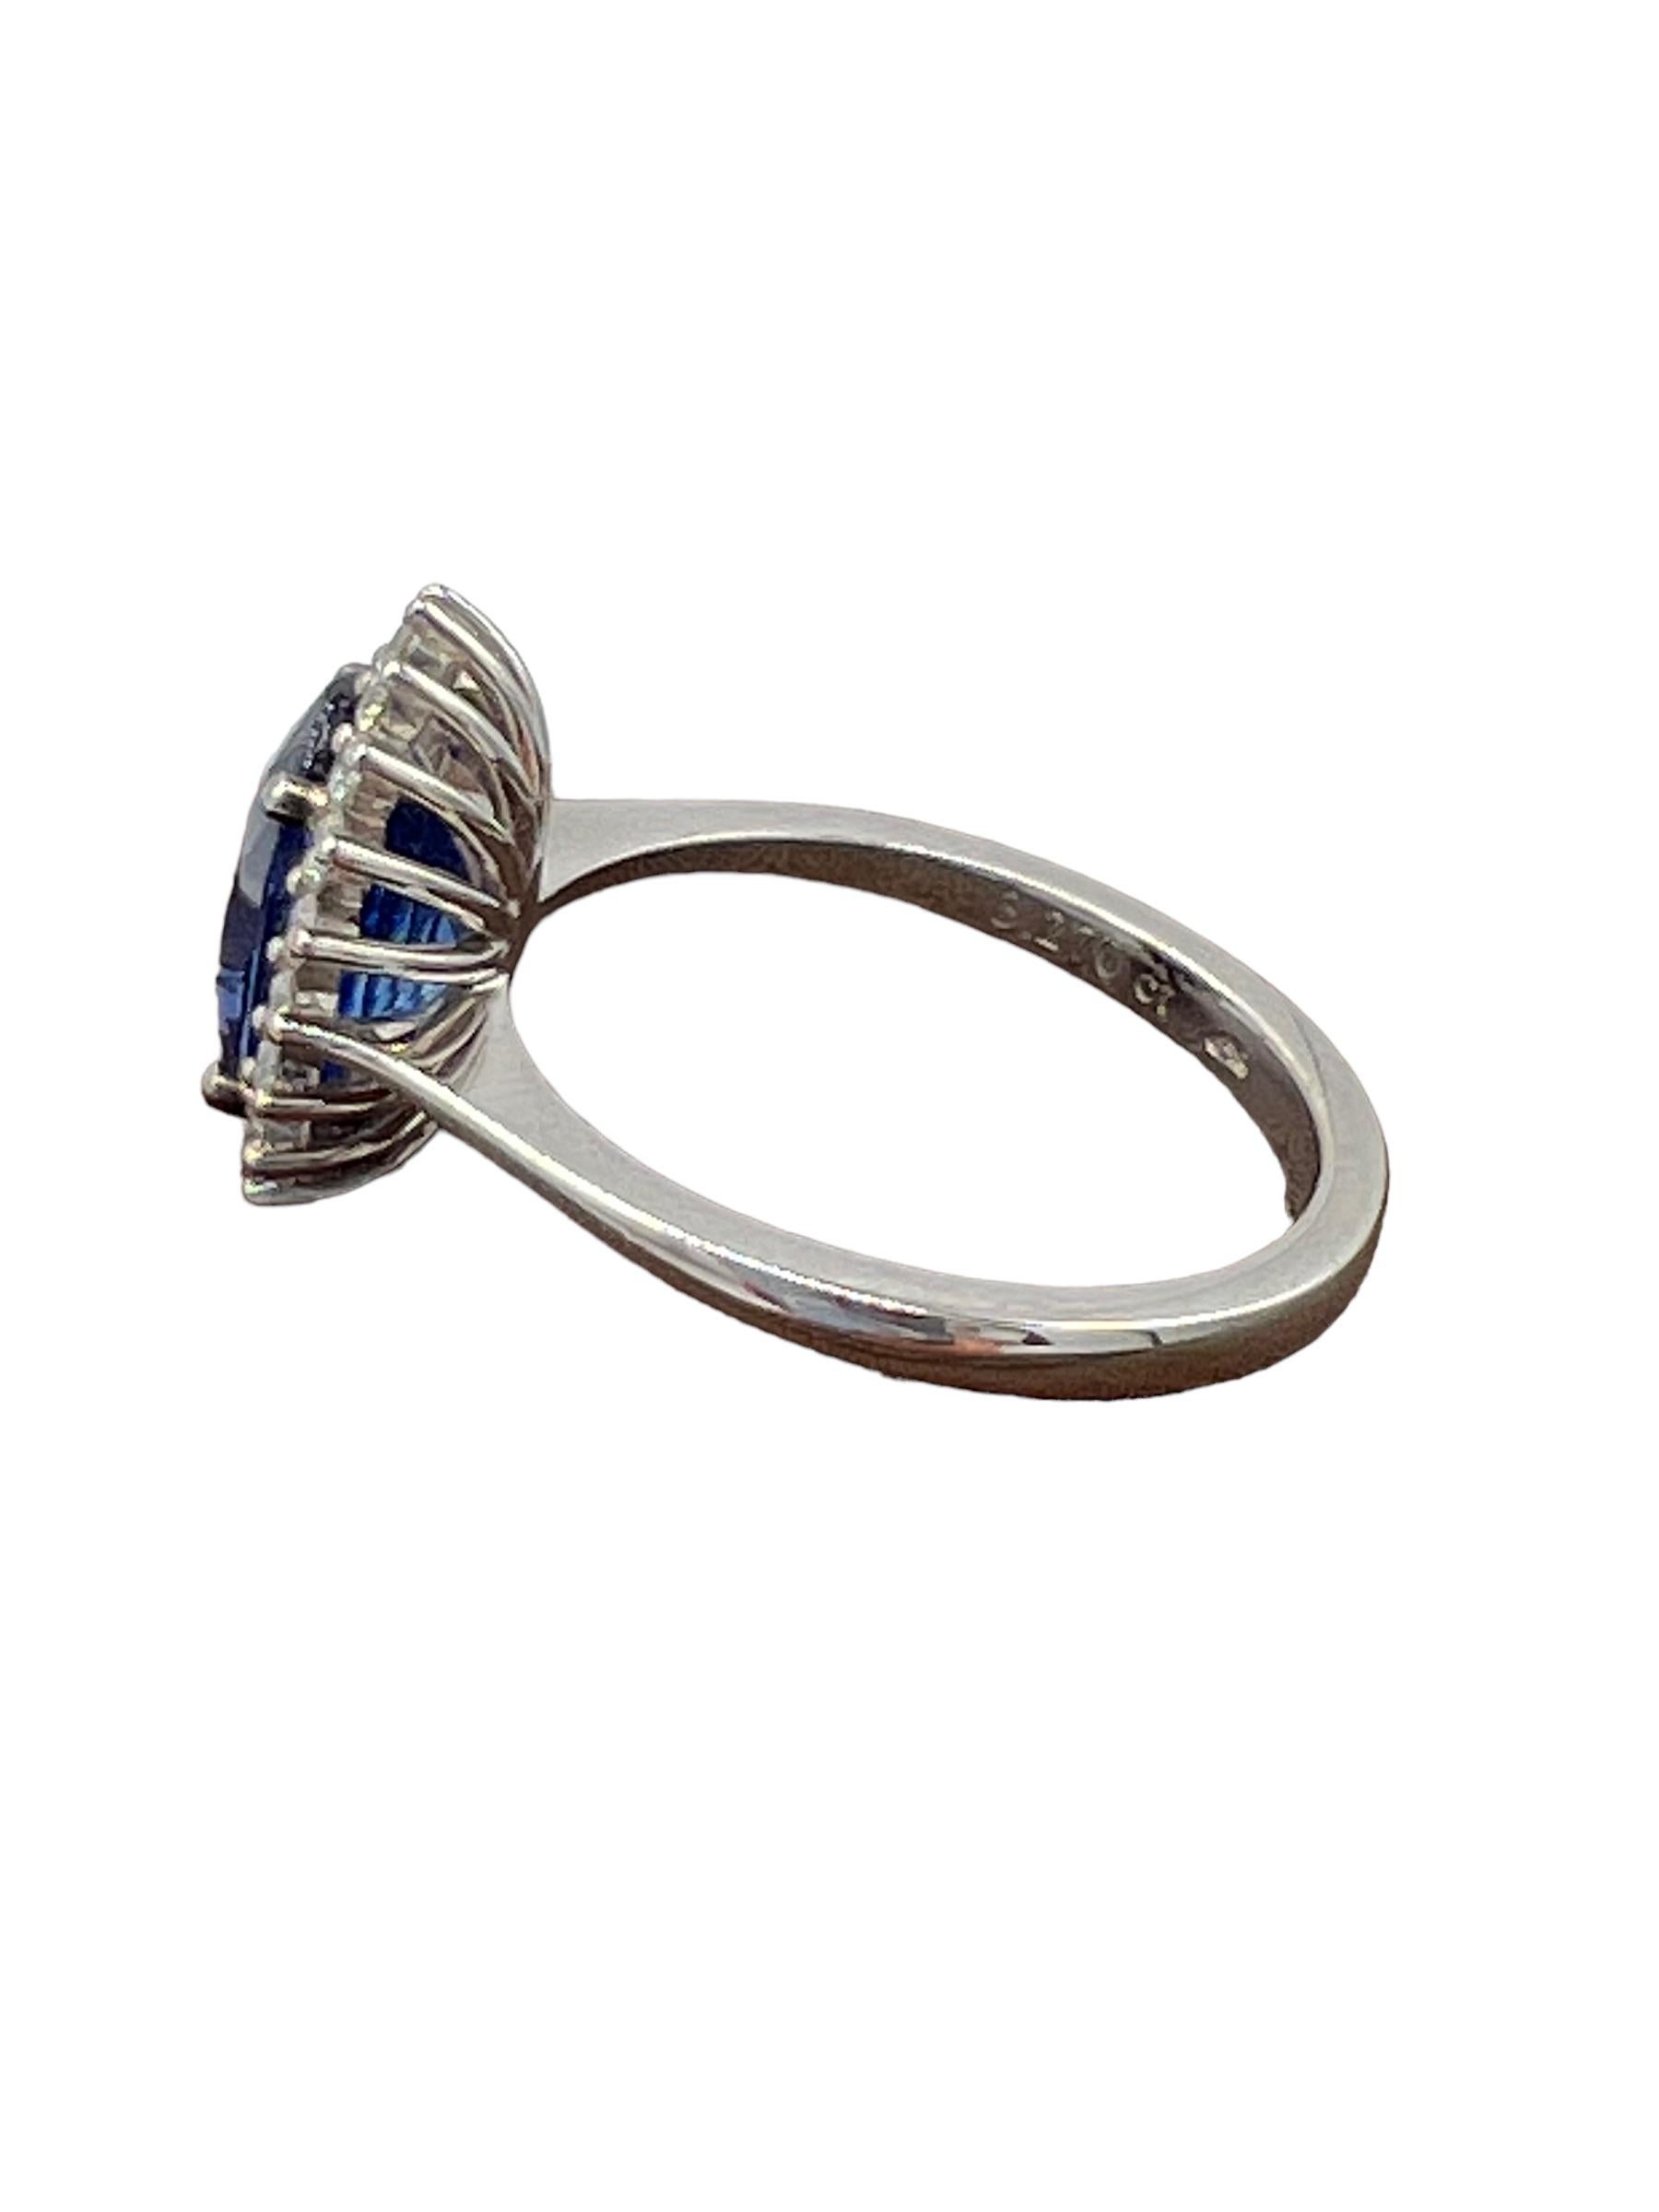 Magnificent natural Ceylon sapphire of 3.27 carats, accompanied by its certificate, surrounded by an elegant pavé of brilliant-cut diamonds totaling 0.36 ct.
the ring is 18 karat white gold, the size is 54 or 6-3/4
the weight of the ring is 4.63